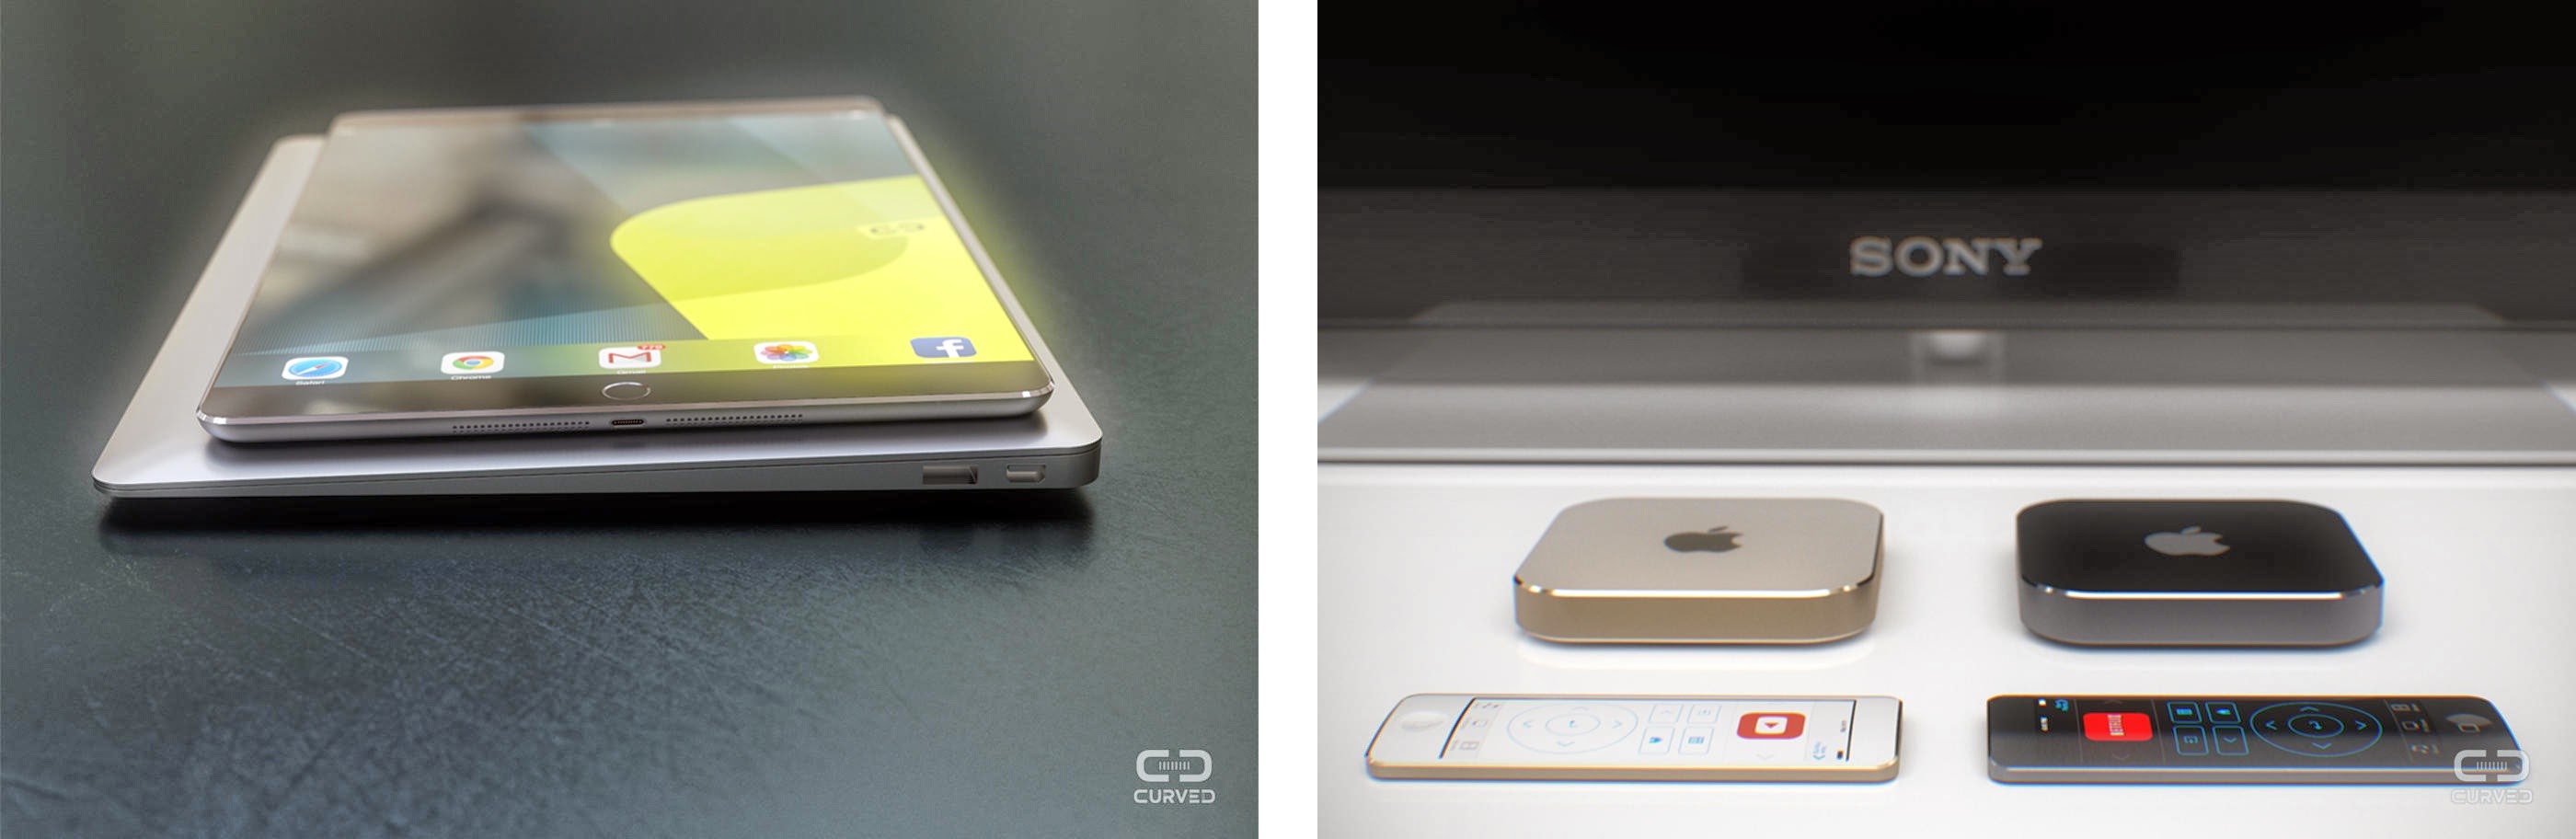 New iPad Pro and iPod Inspired Apple TV Concept